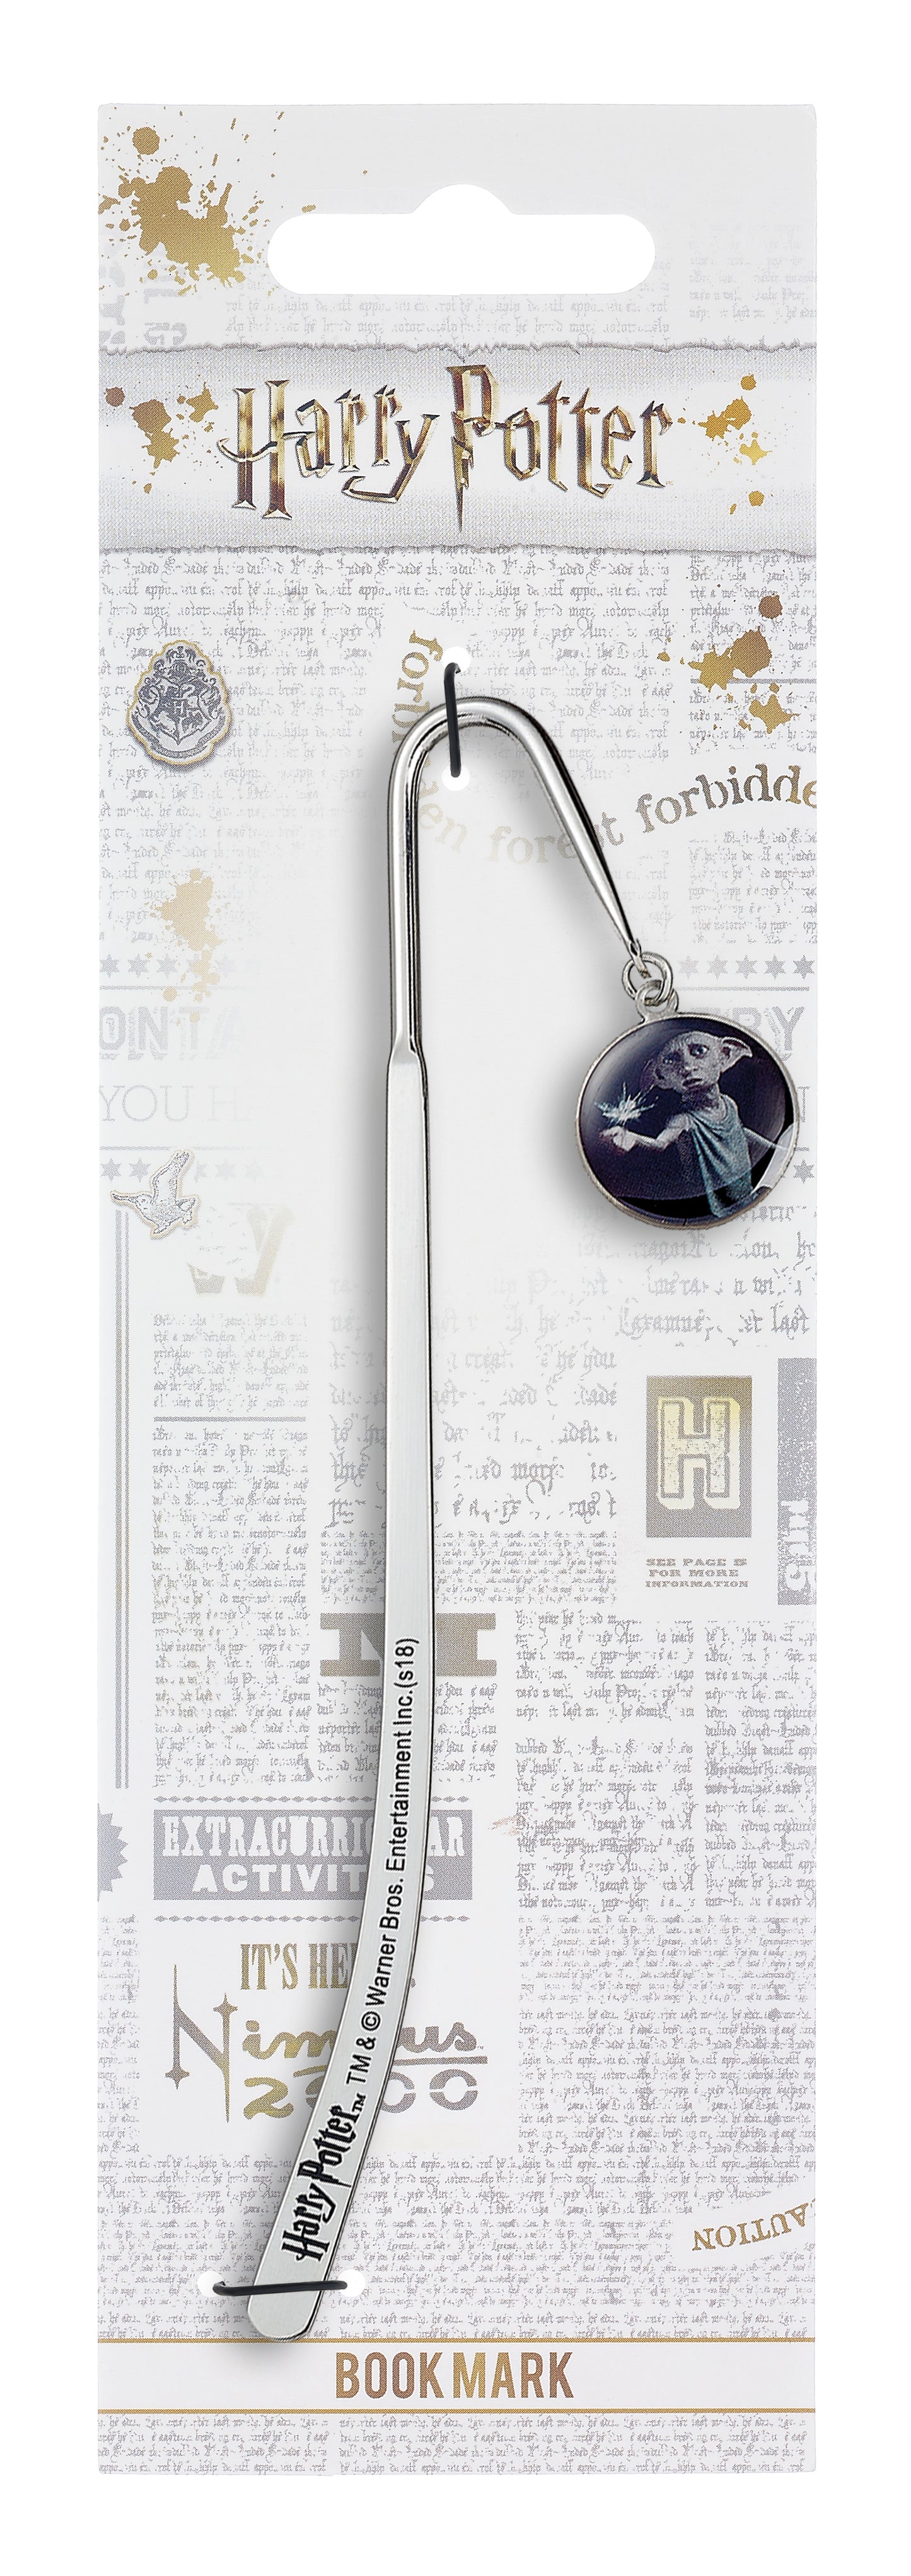 Harry Potter Dobby the House-Elf Bookmark - Silver